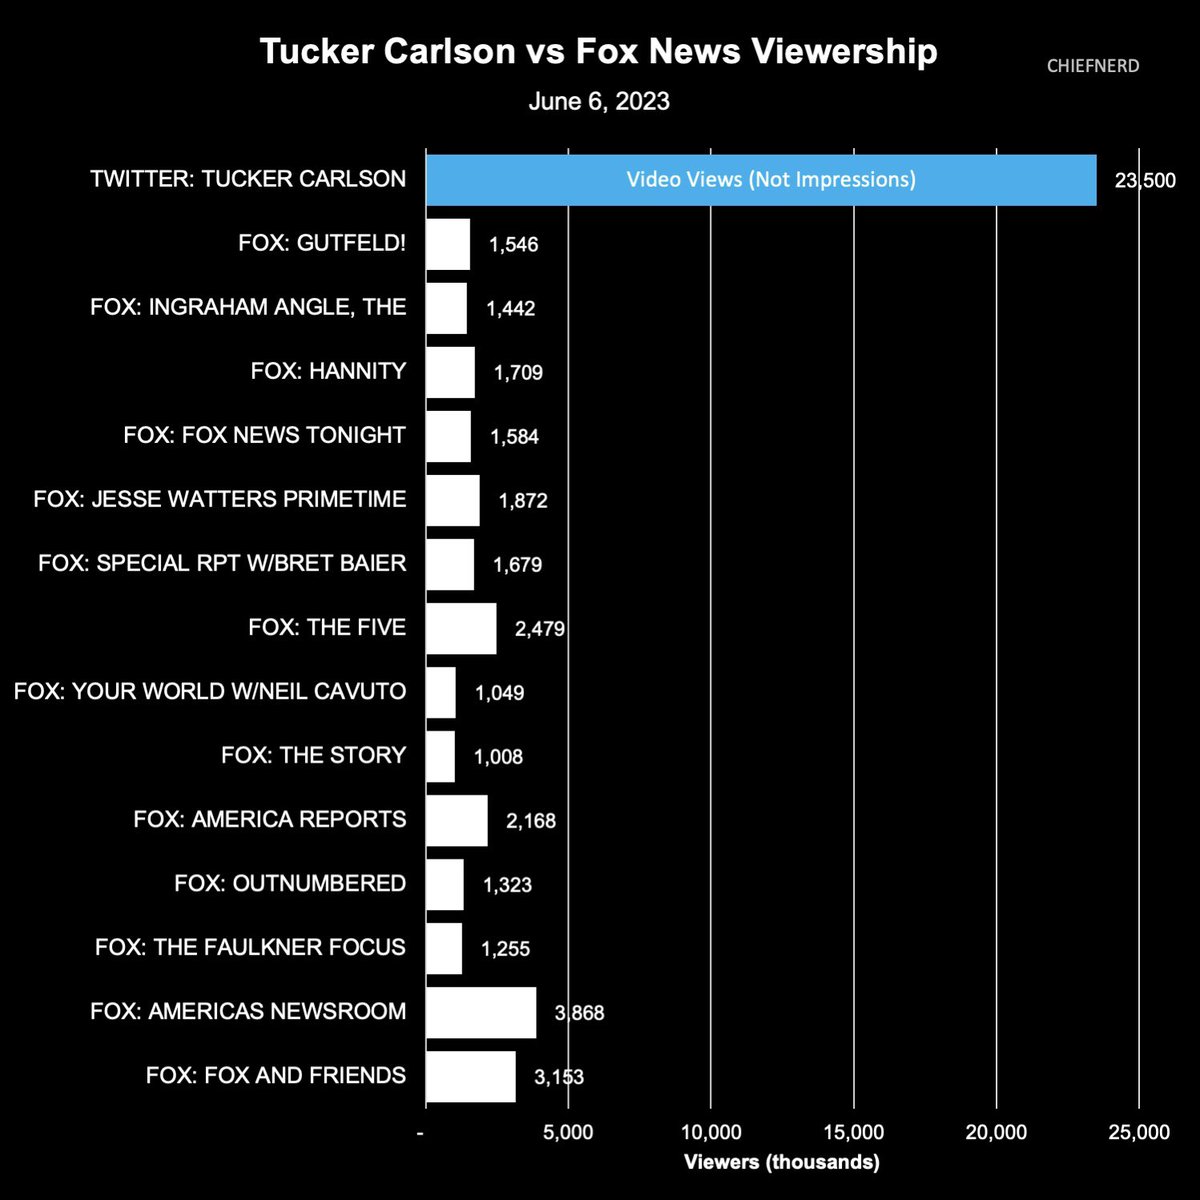 Tucker Carlson’s first episode on Twitter on June 6th reached 23.5M video views so far (and 106M impressions). Here is how that stacks up against the Fox News ratings for the same day. It’s not even close. mediaite.com/daily-ratings/… @TuckerCarlson @elonmusk